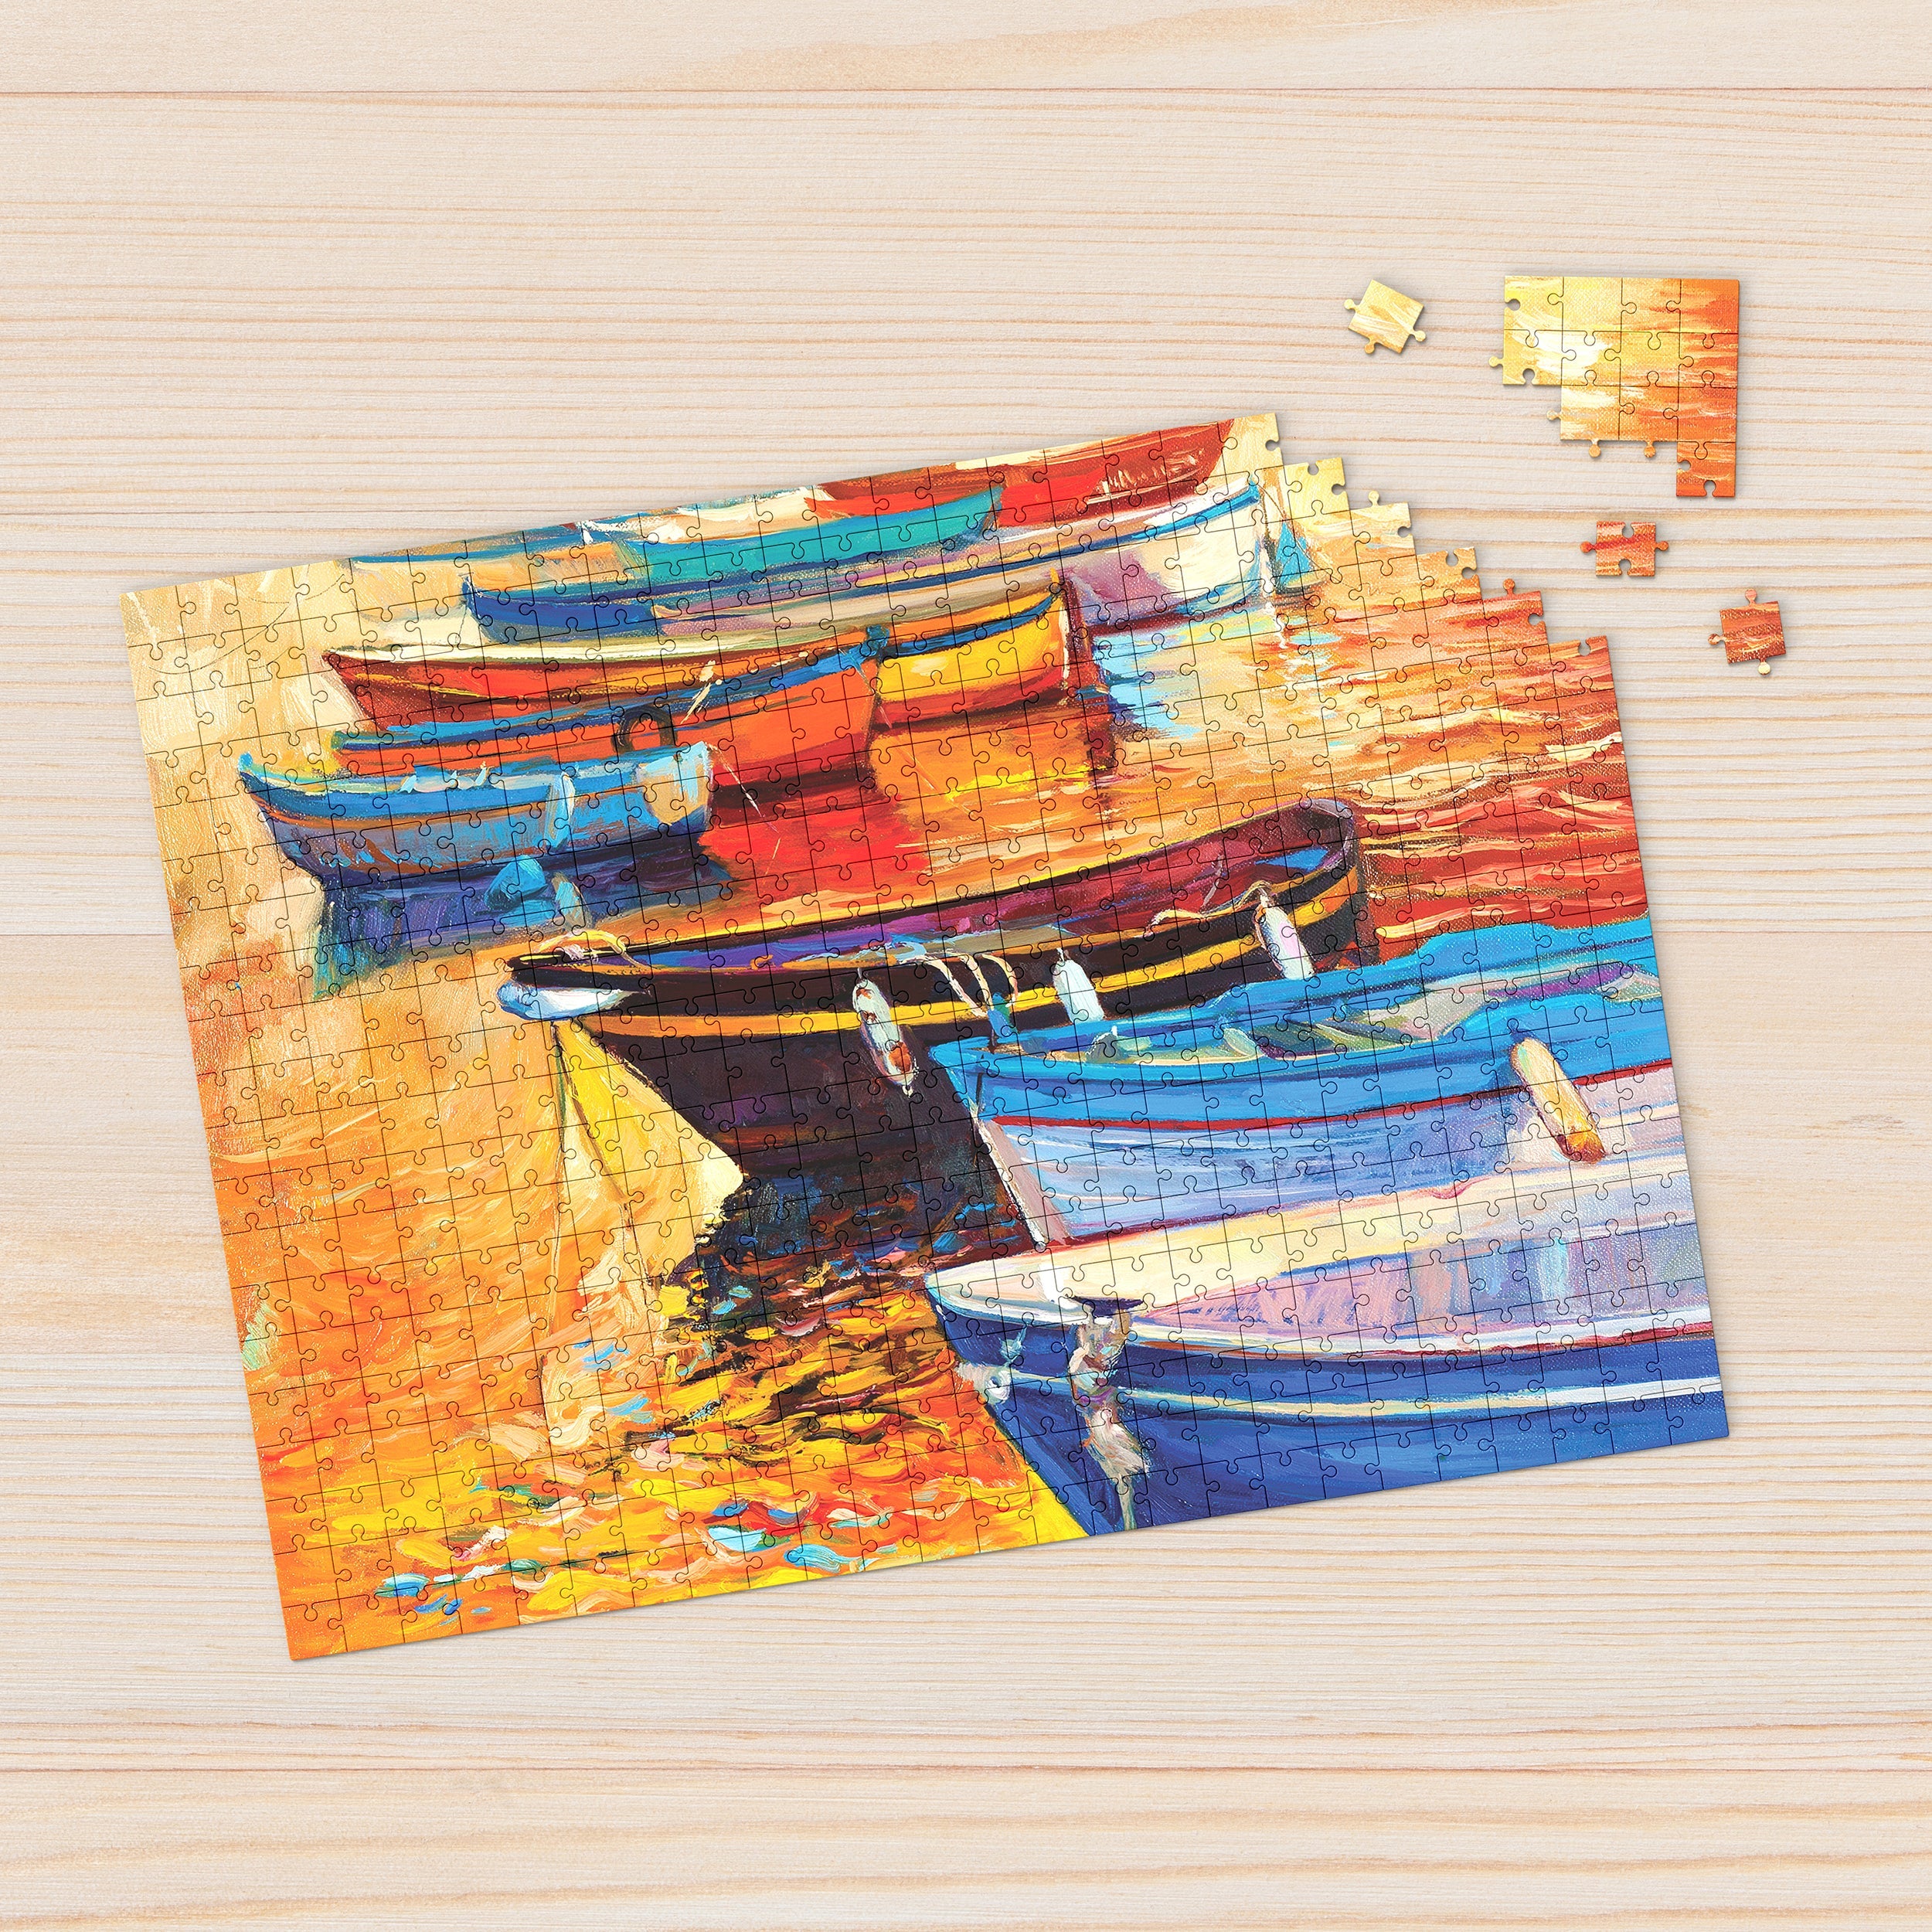 Boats in a Row 500 Piece - Jigsaw Puzzle